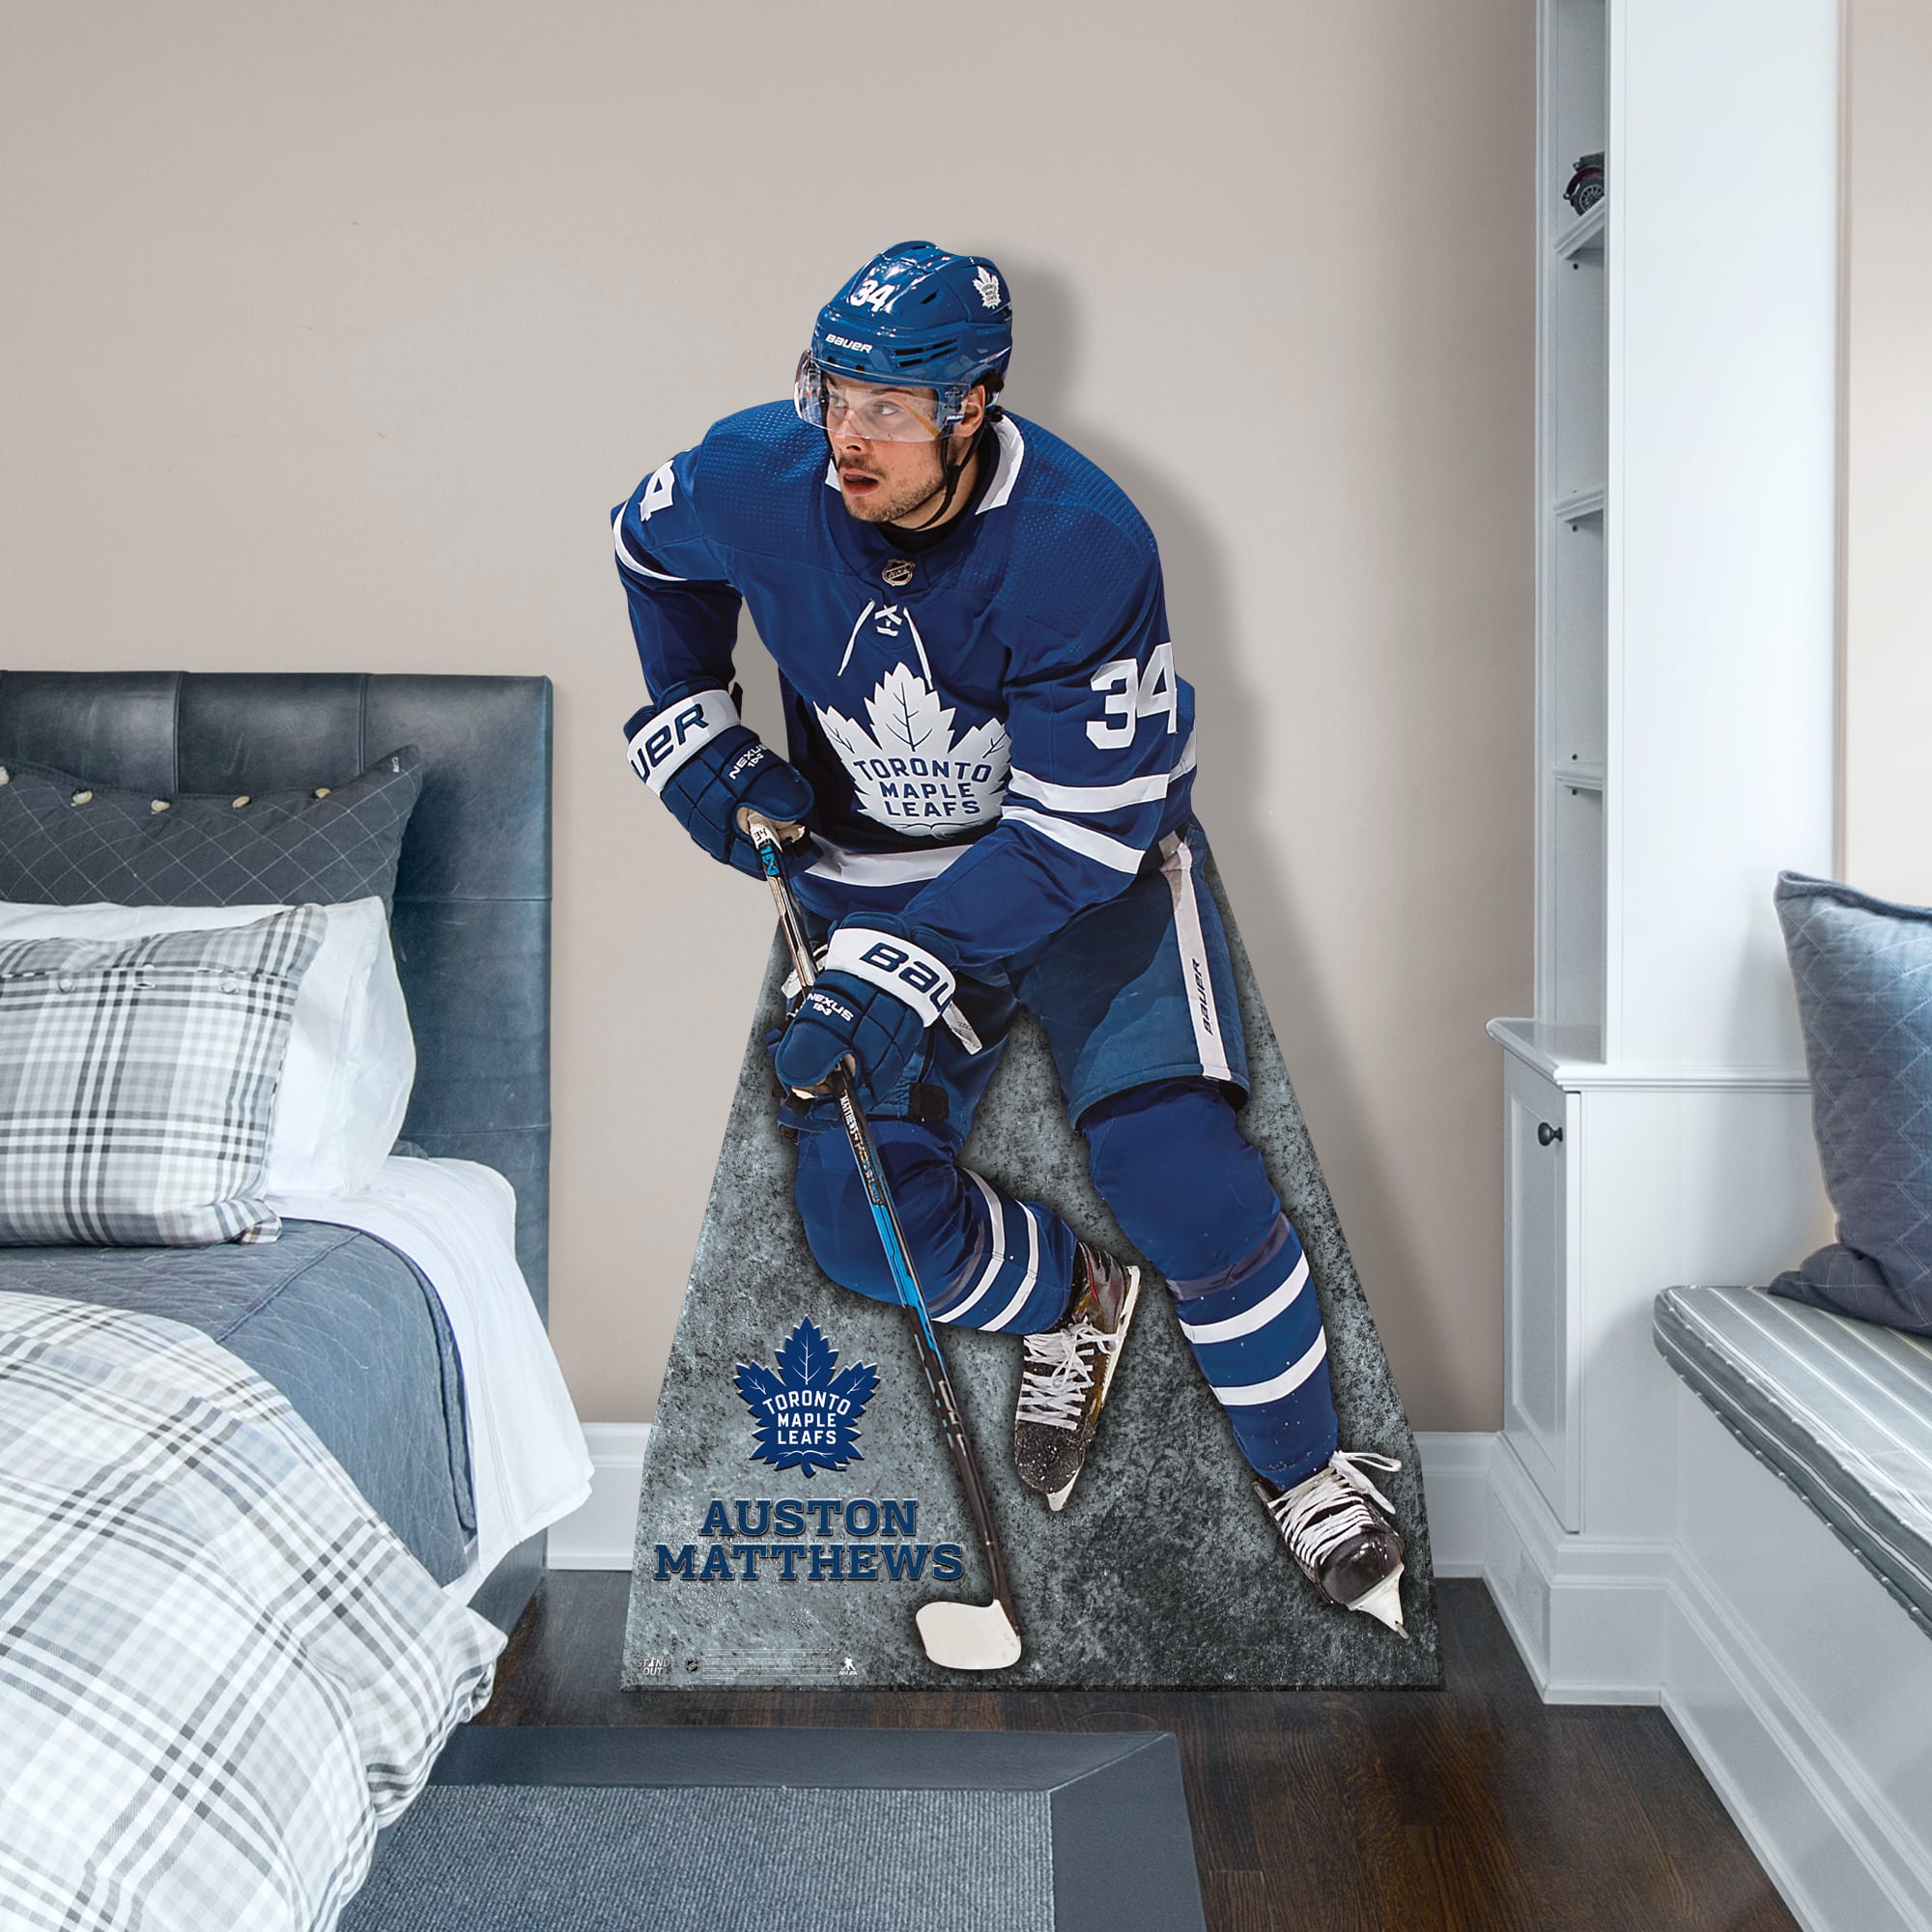 Auston Matthews for Toronto Maple Leafs: Stand Out - Officially Licensed NHL Removable Wall Decal 45.0"W x 77.0"H by Fathead | V